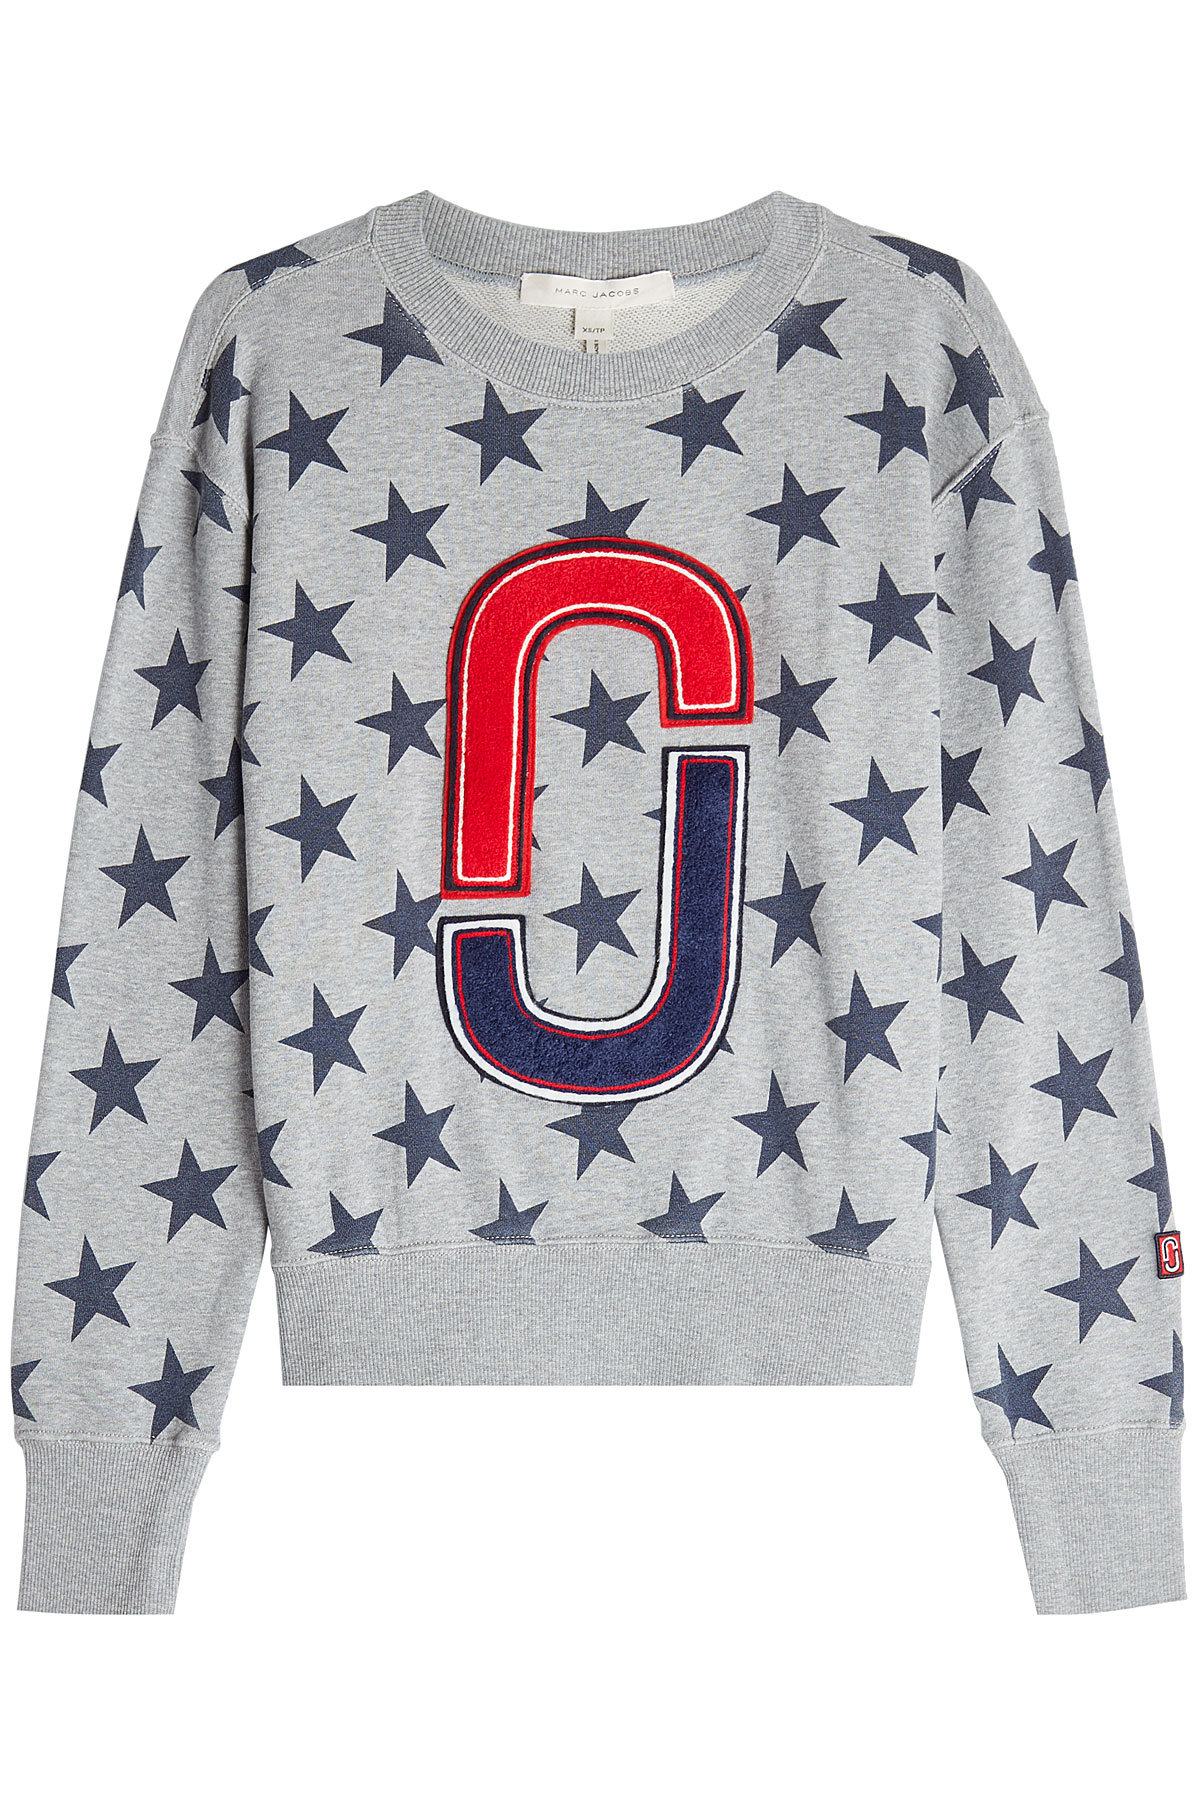 Printed Cotton Sweatshirt with Appliqués by Marc Jacobs